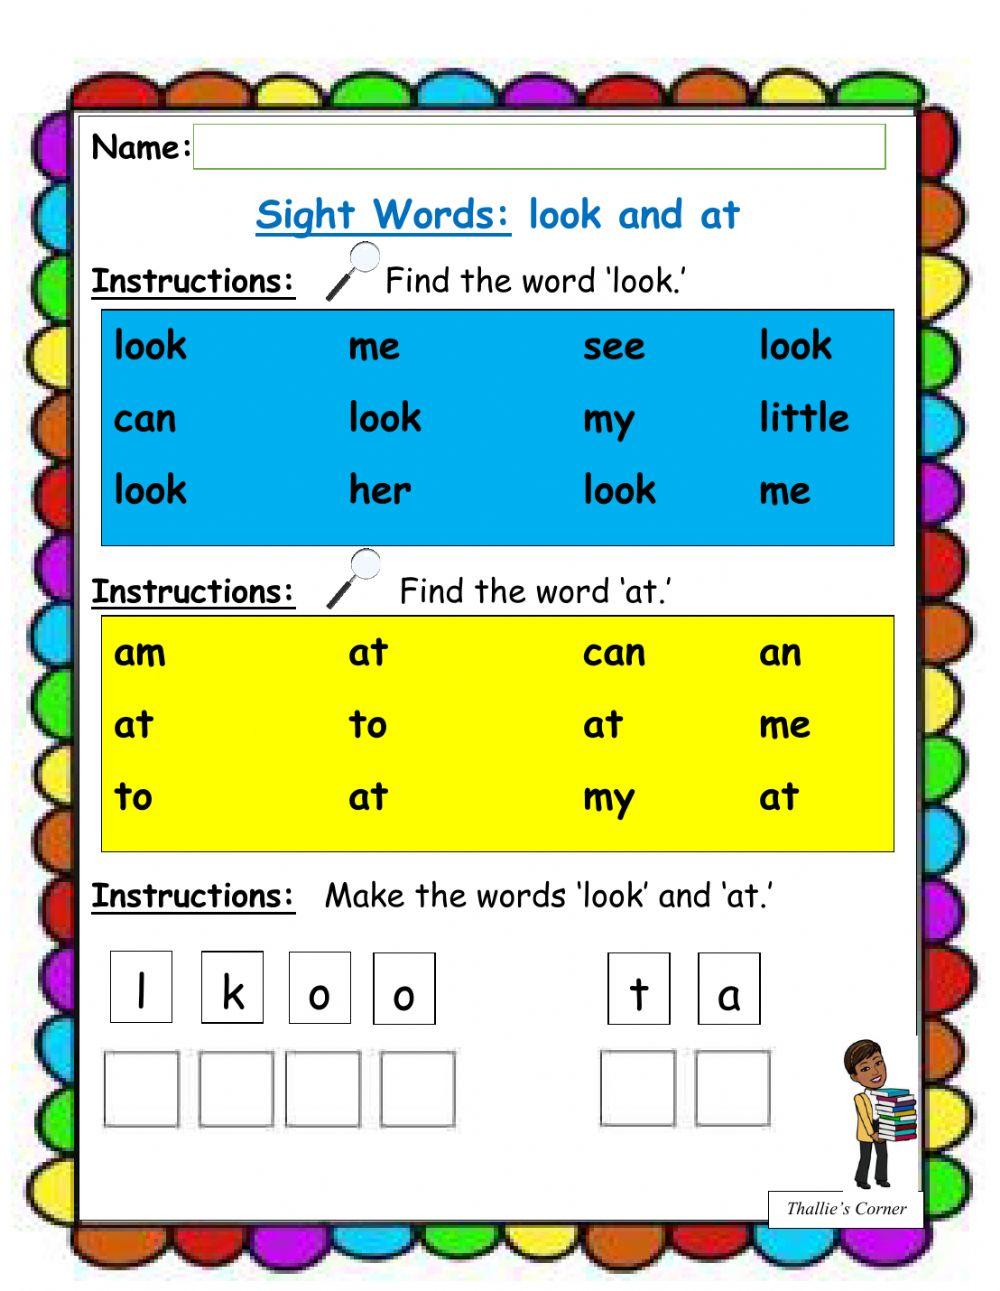 Sight Words 'look' and 'at'